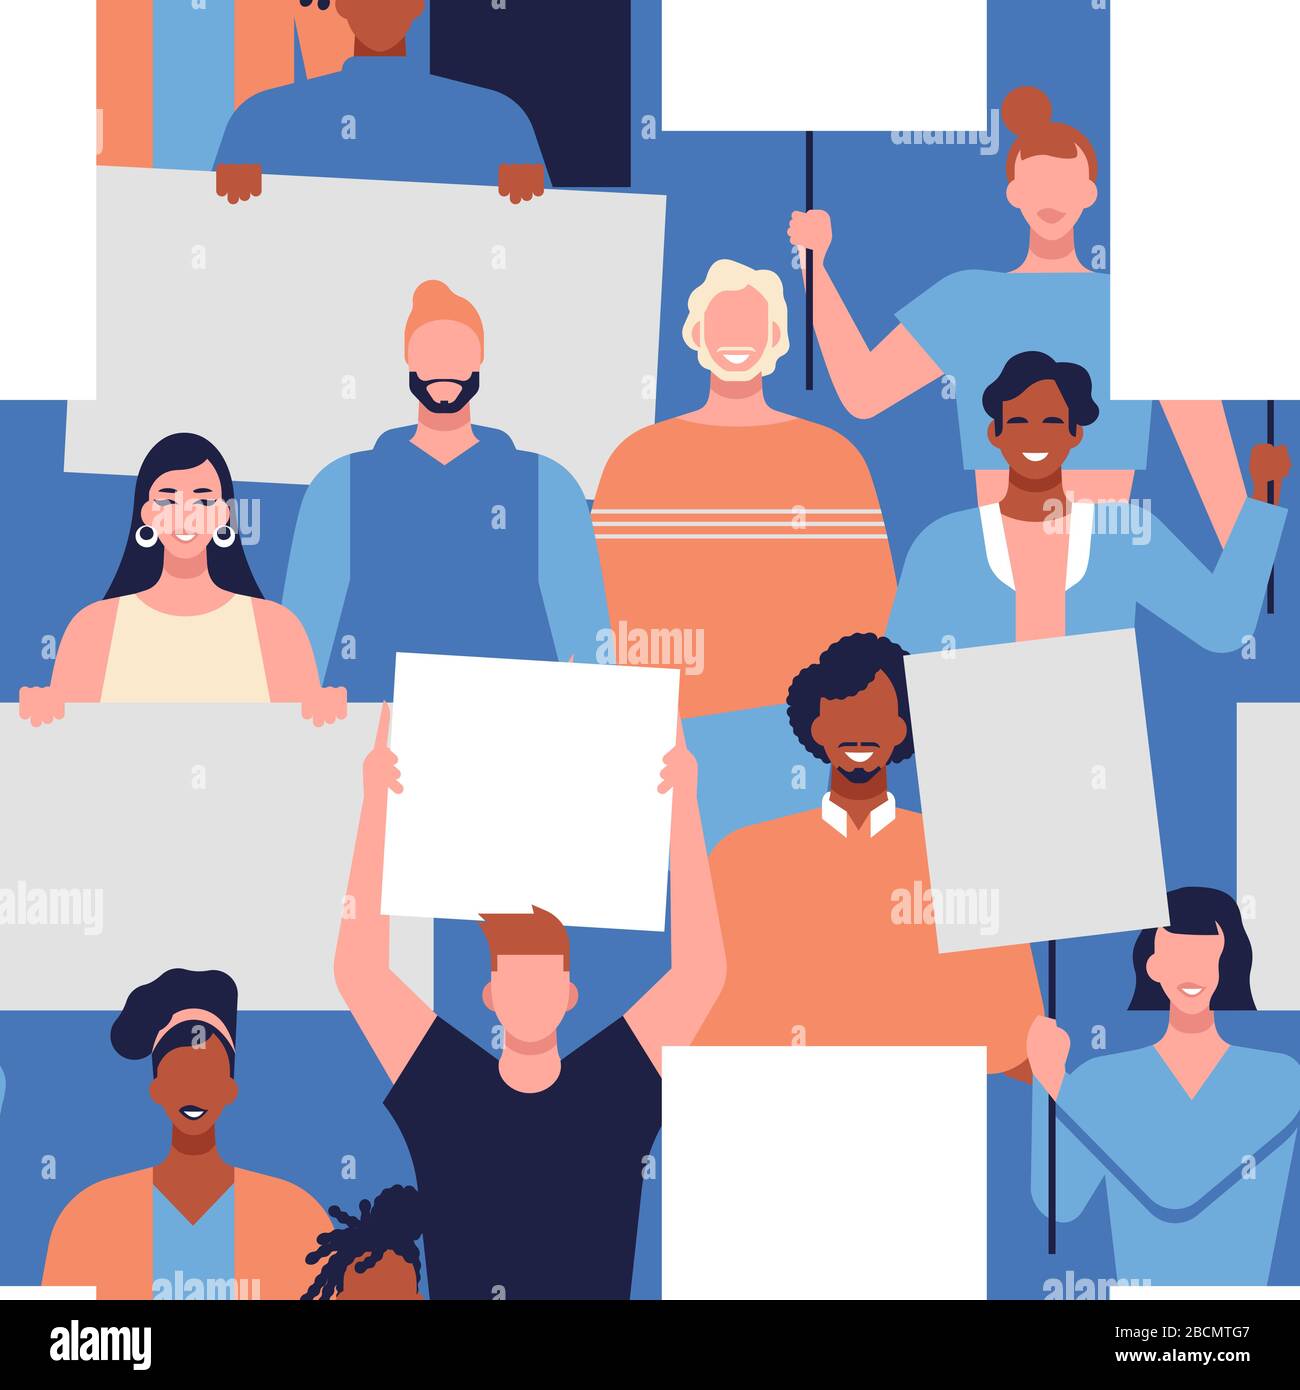 Seamless pattern of  diverse young people generation at protest event holding white picket sign. Activist movement background with men and women for h Stock Vector